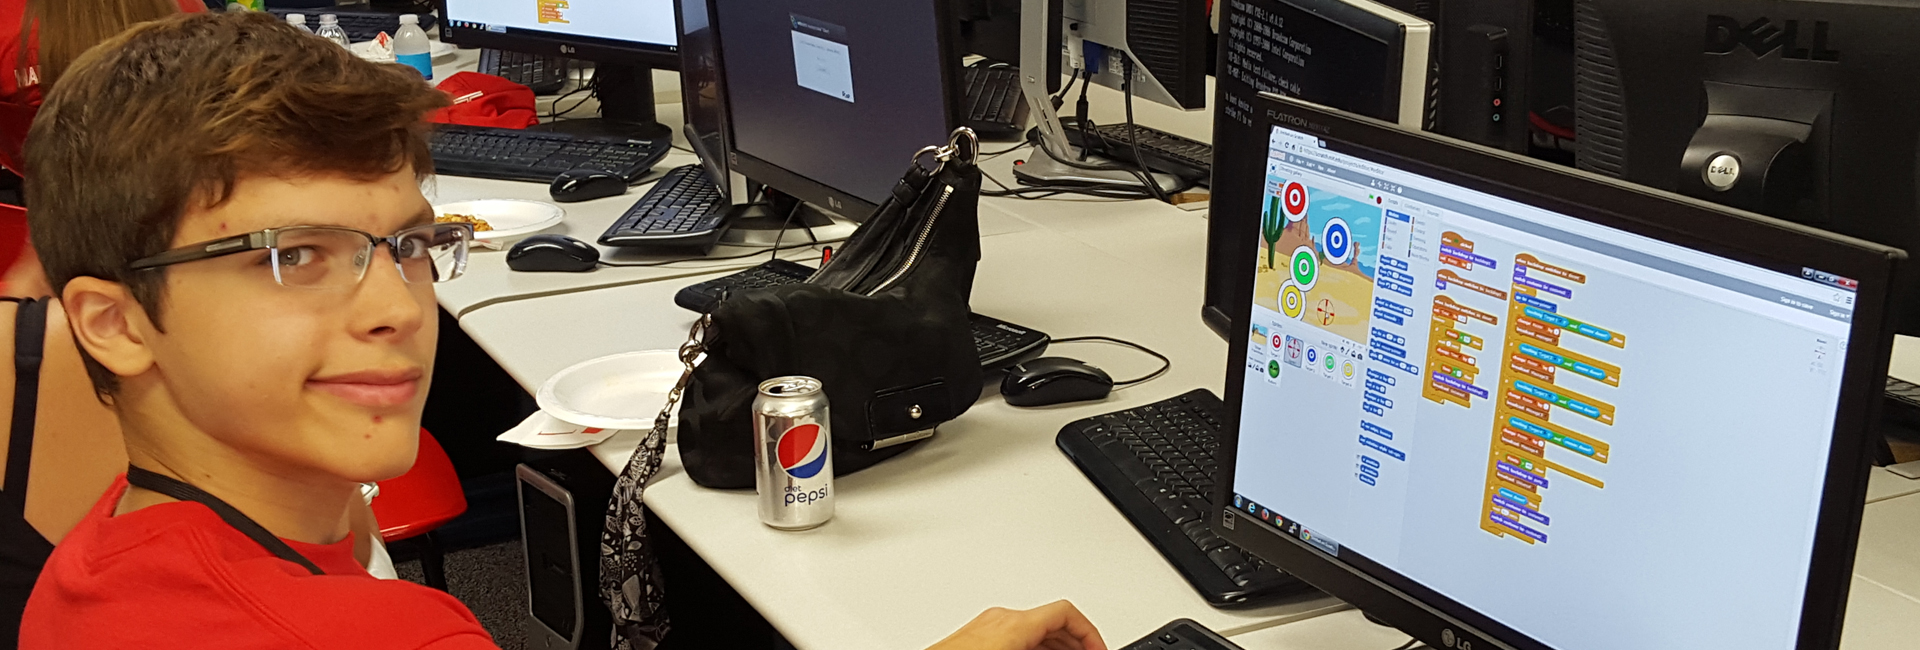 A Techademy student experiments with Scratch programming.